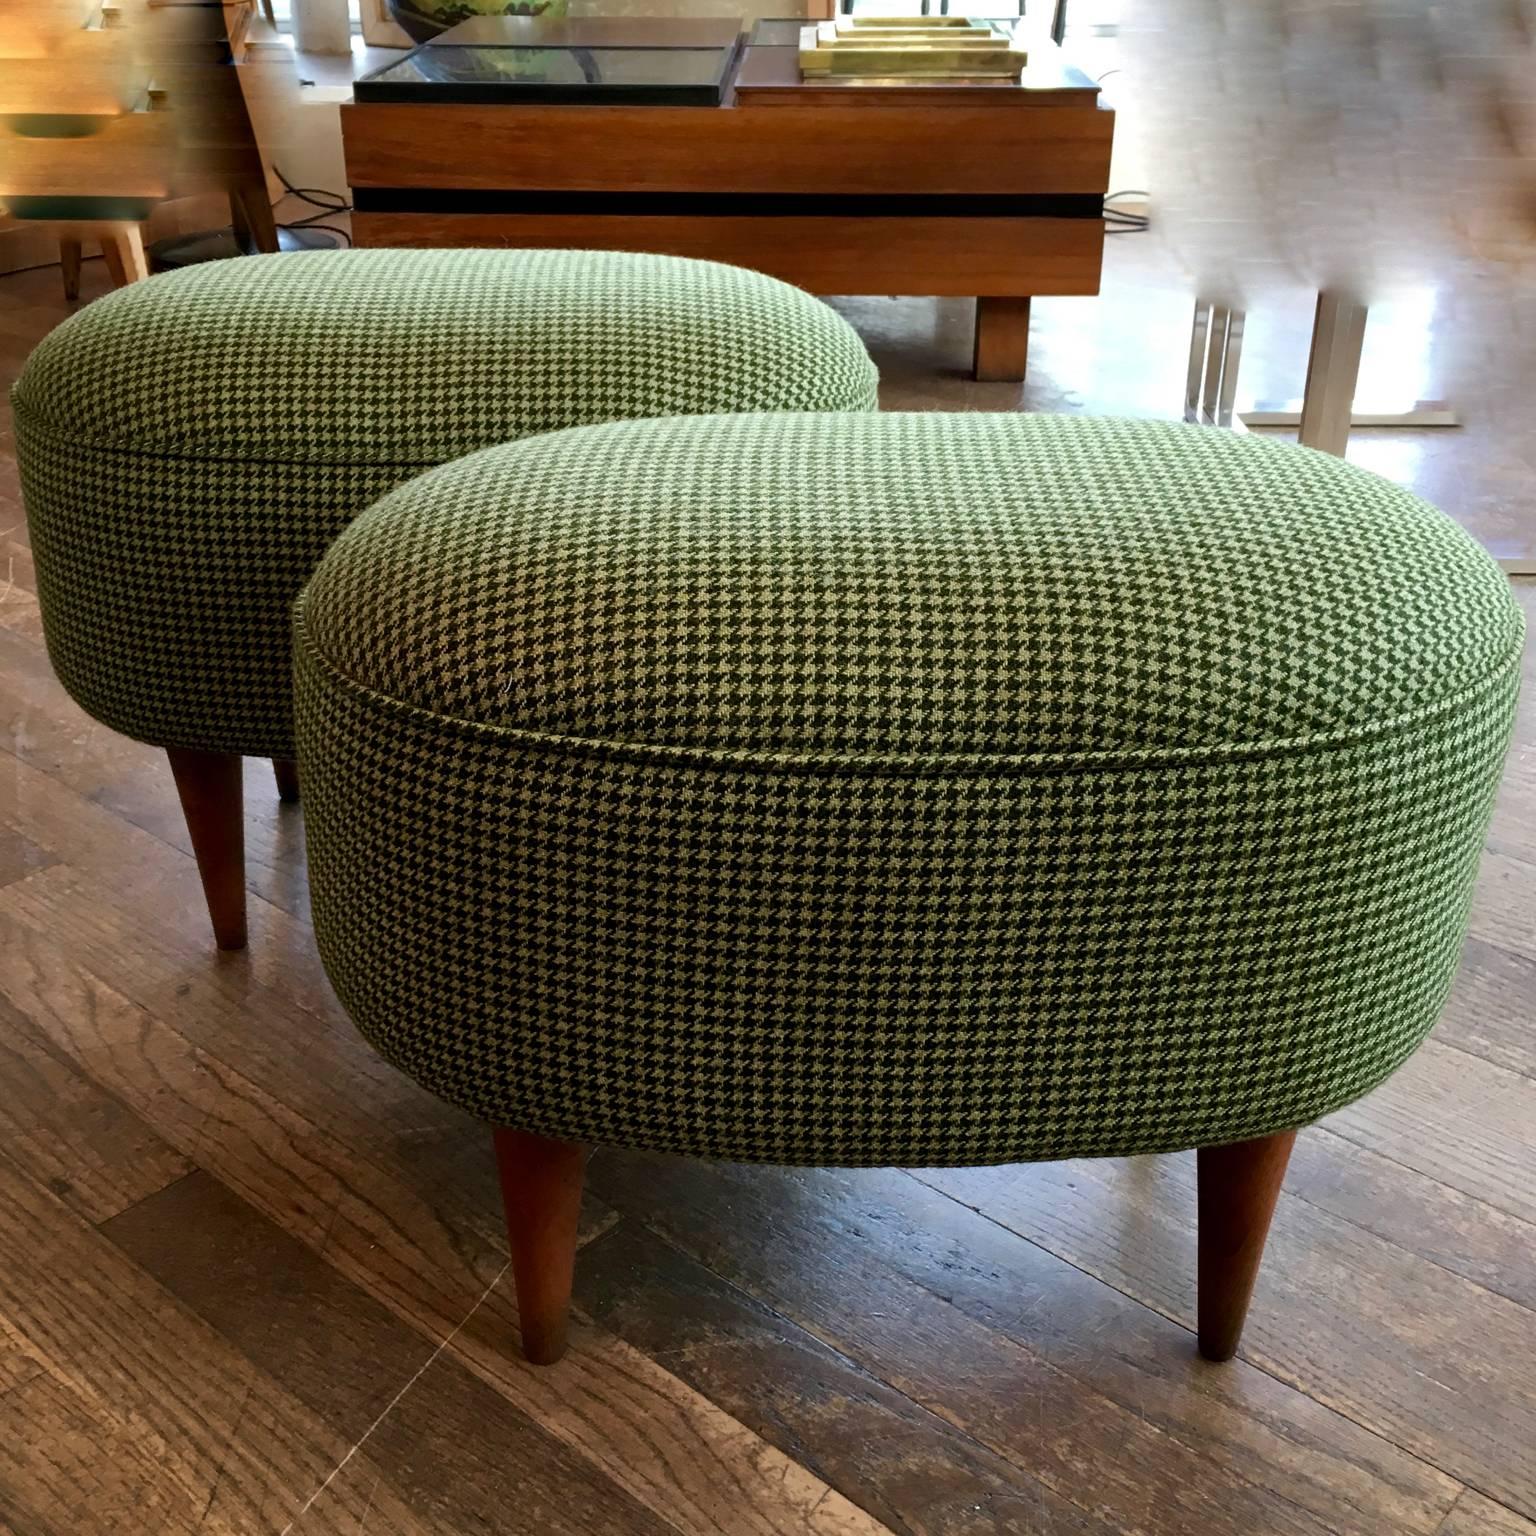 Mid-Century Modern 1950s Italian Footstools in a Woollen Green Houndstooth Upholstery, Pair